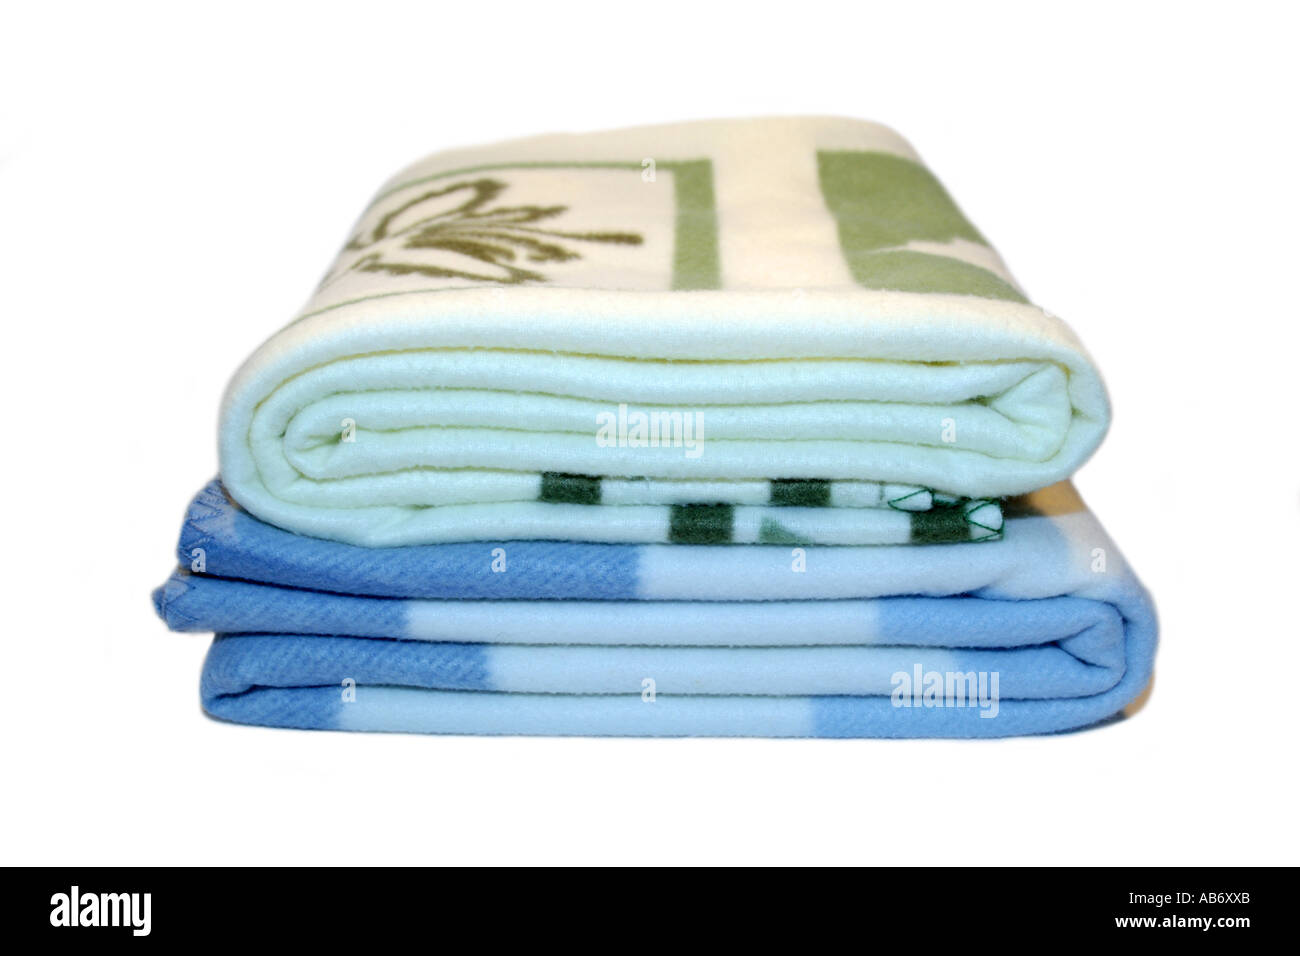 A Soft blue check and a green patterned Blankets Stock Photo